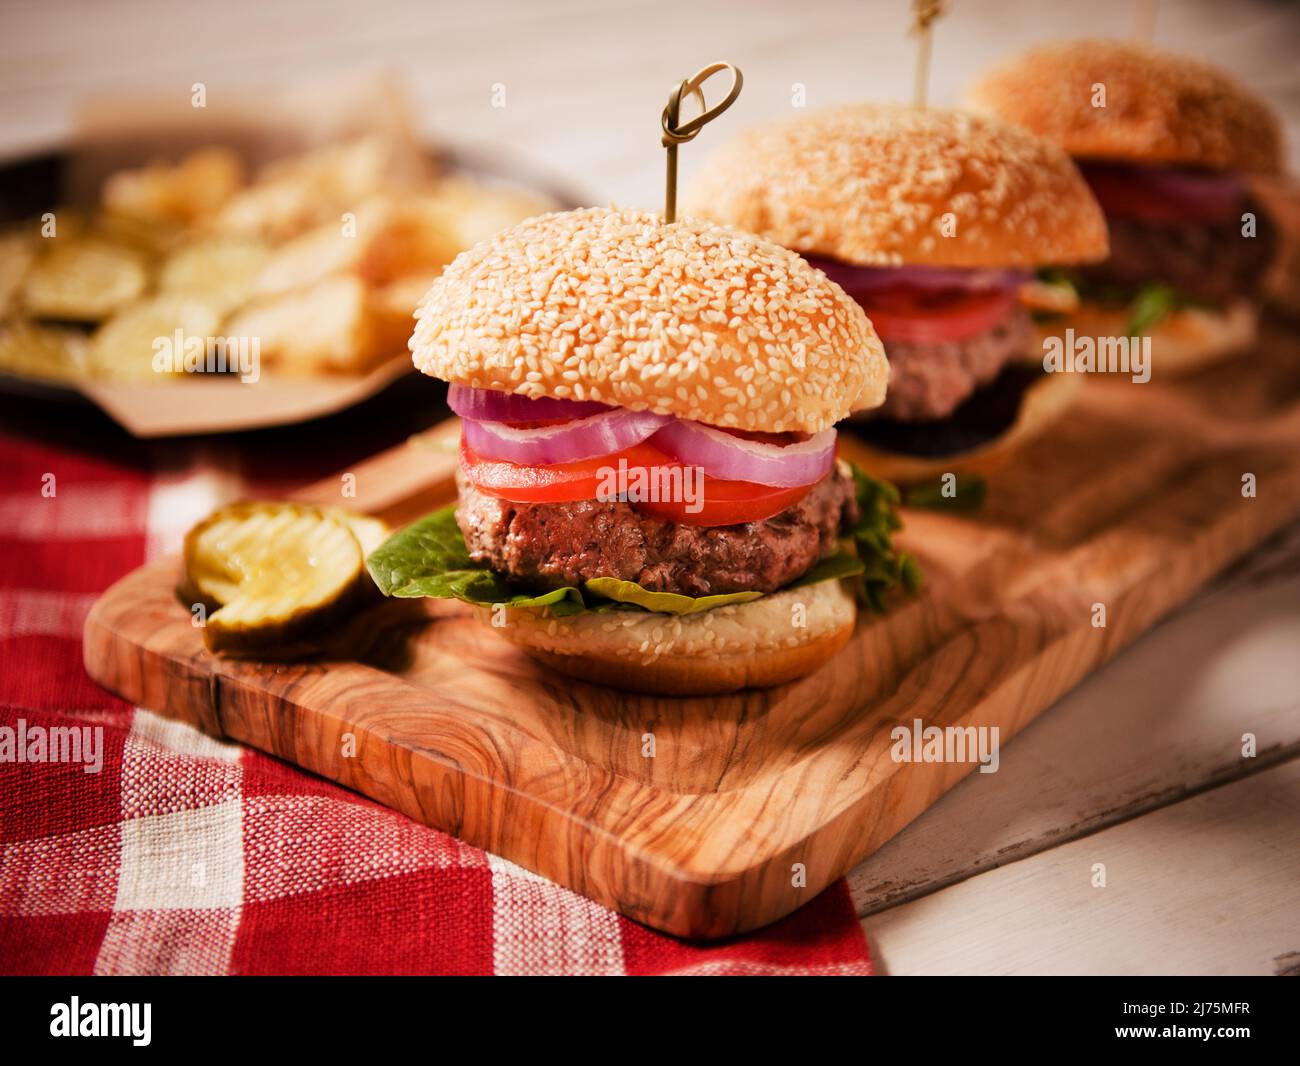 Tray of Hamburgers with onion, lettuce, tomato and pickles Stock Photo